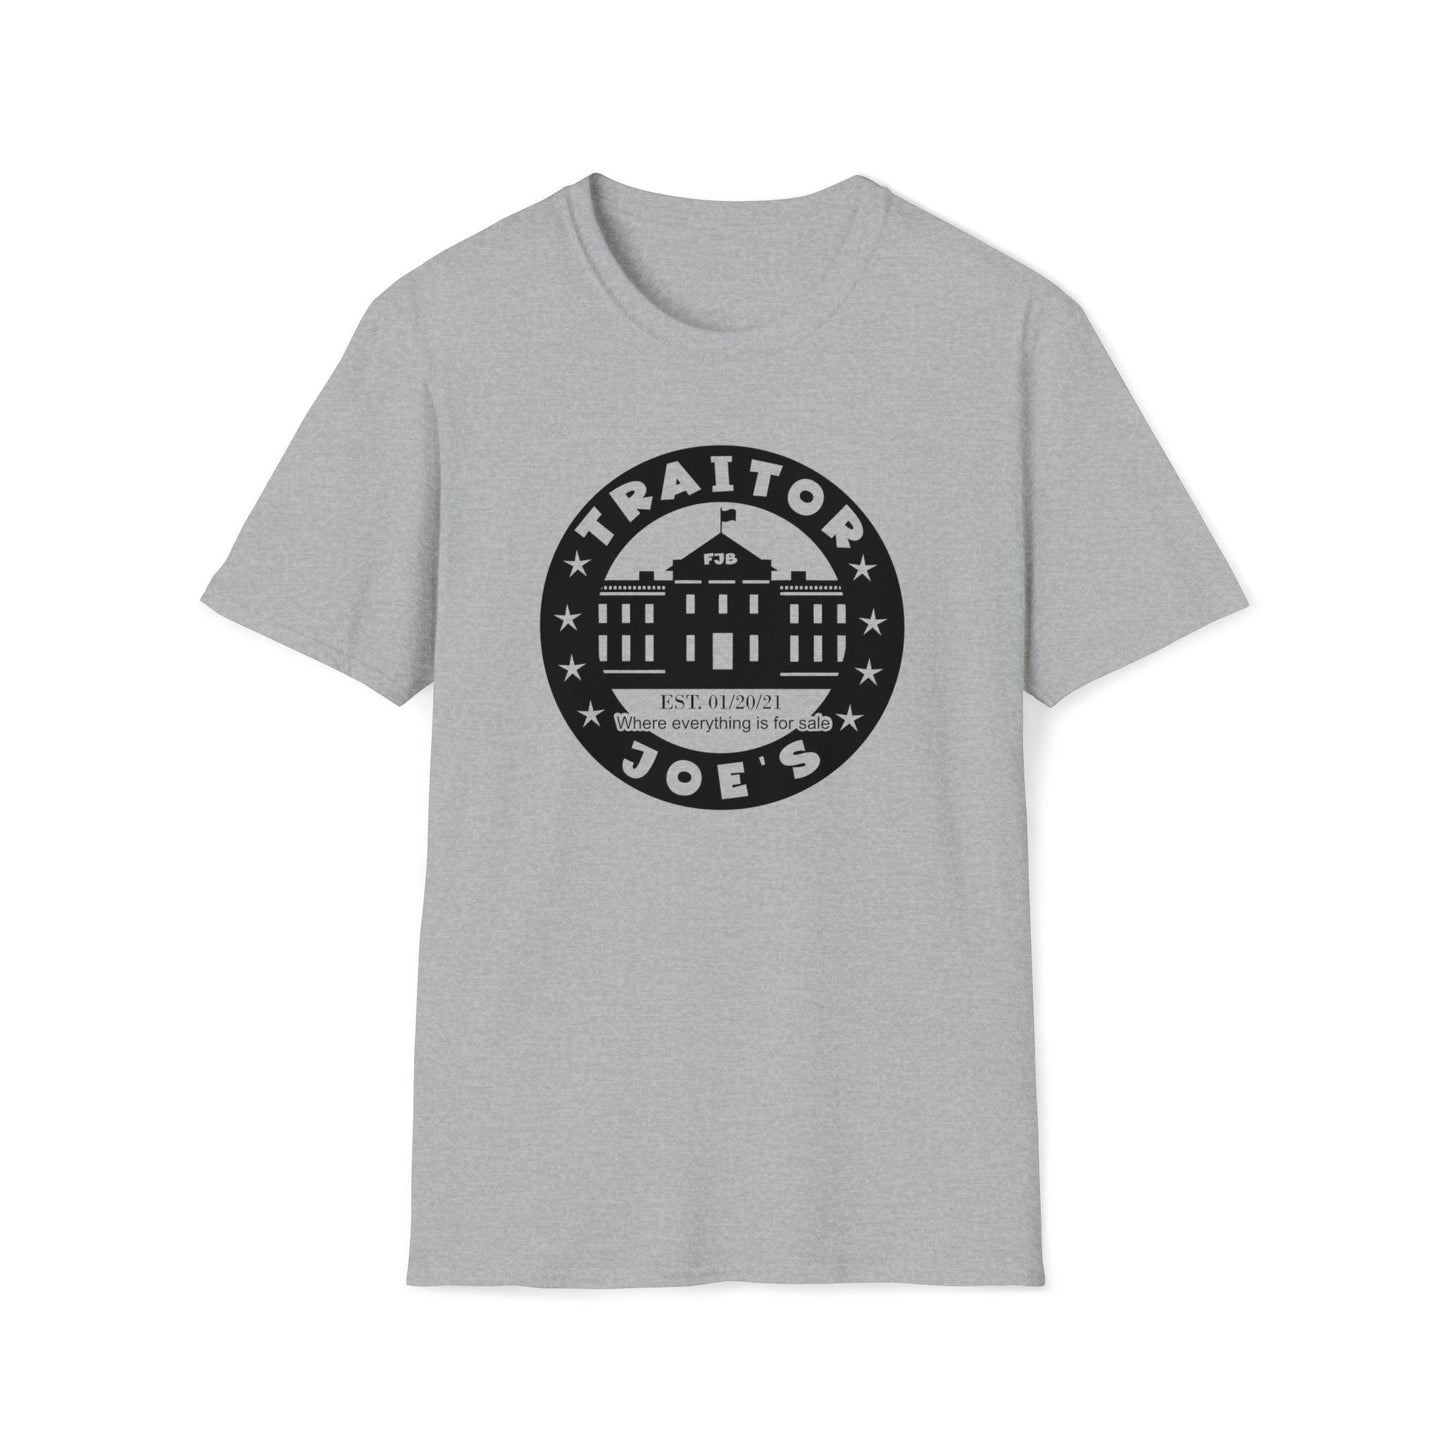 Traitor Joes, FJB with the Whitehouse Graphic Tee - Make a Statement in Comfort! - Canadohta Custom Creations LLC